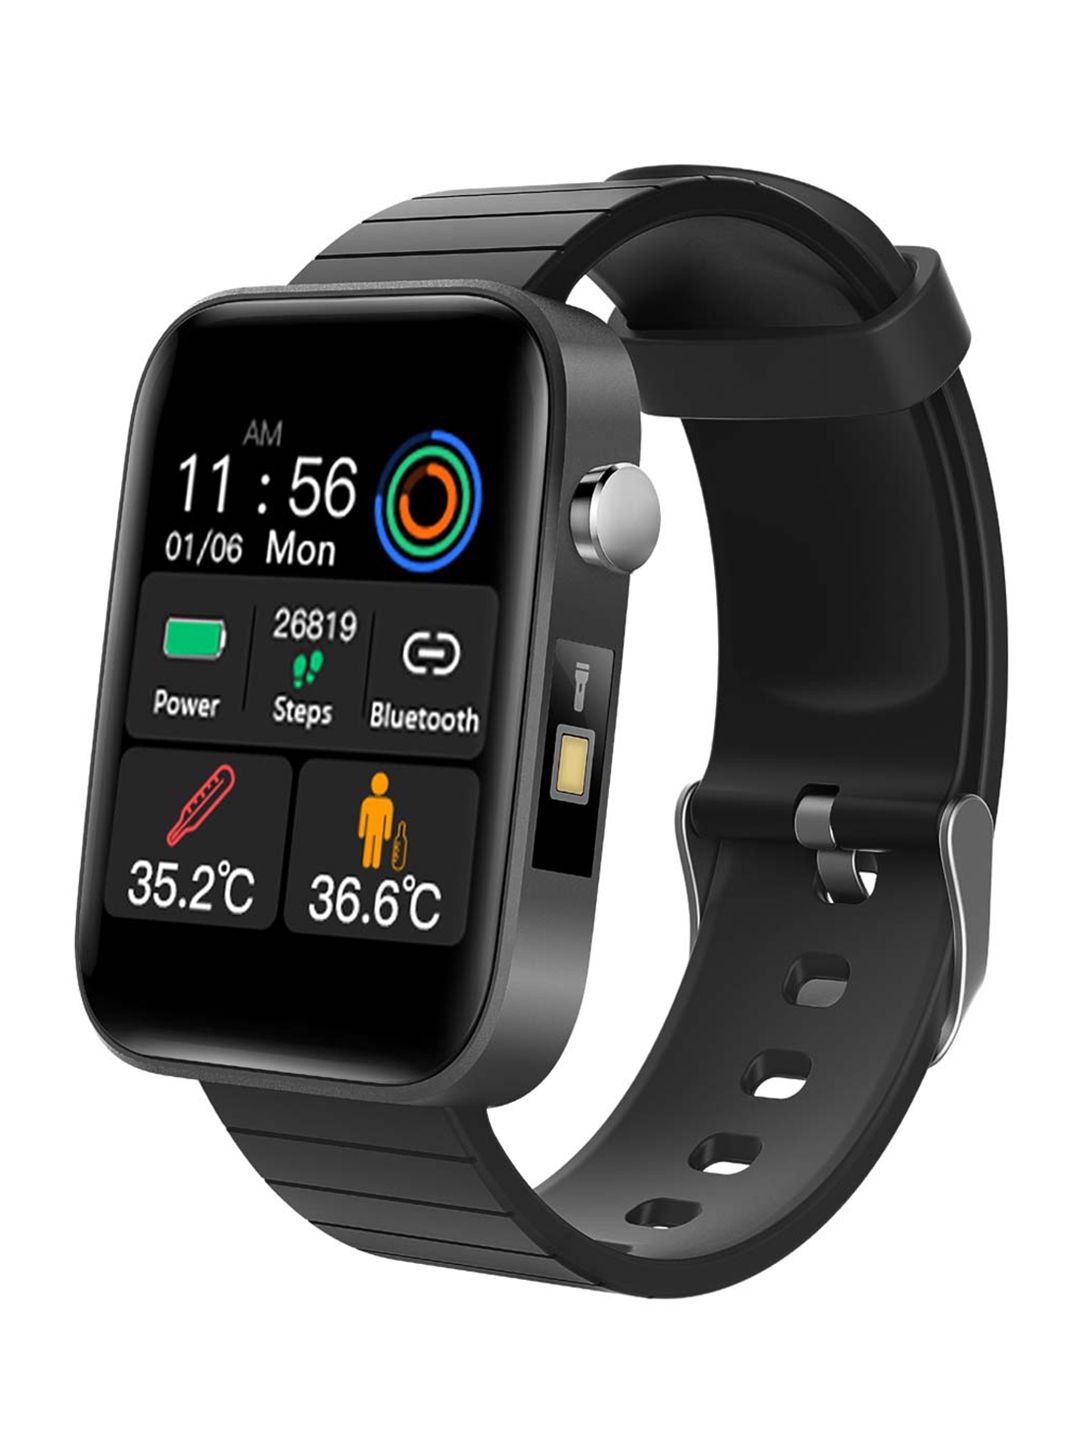 EYNK Black Full Touch Display Fitness Tracker Smart Watches Price in India